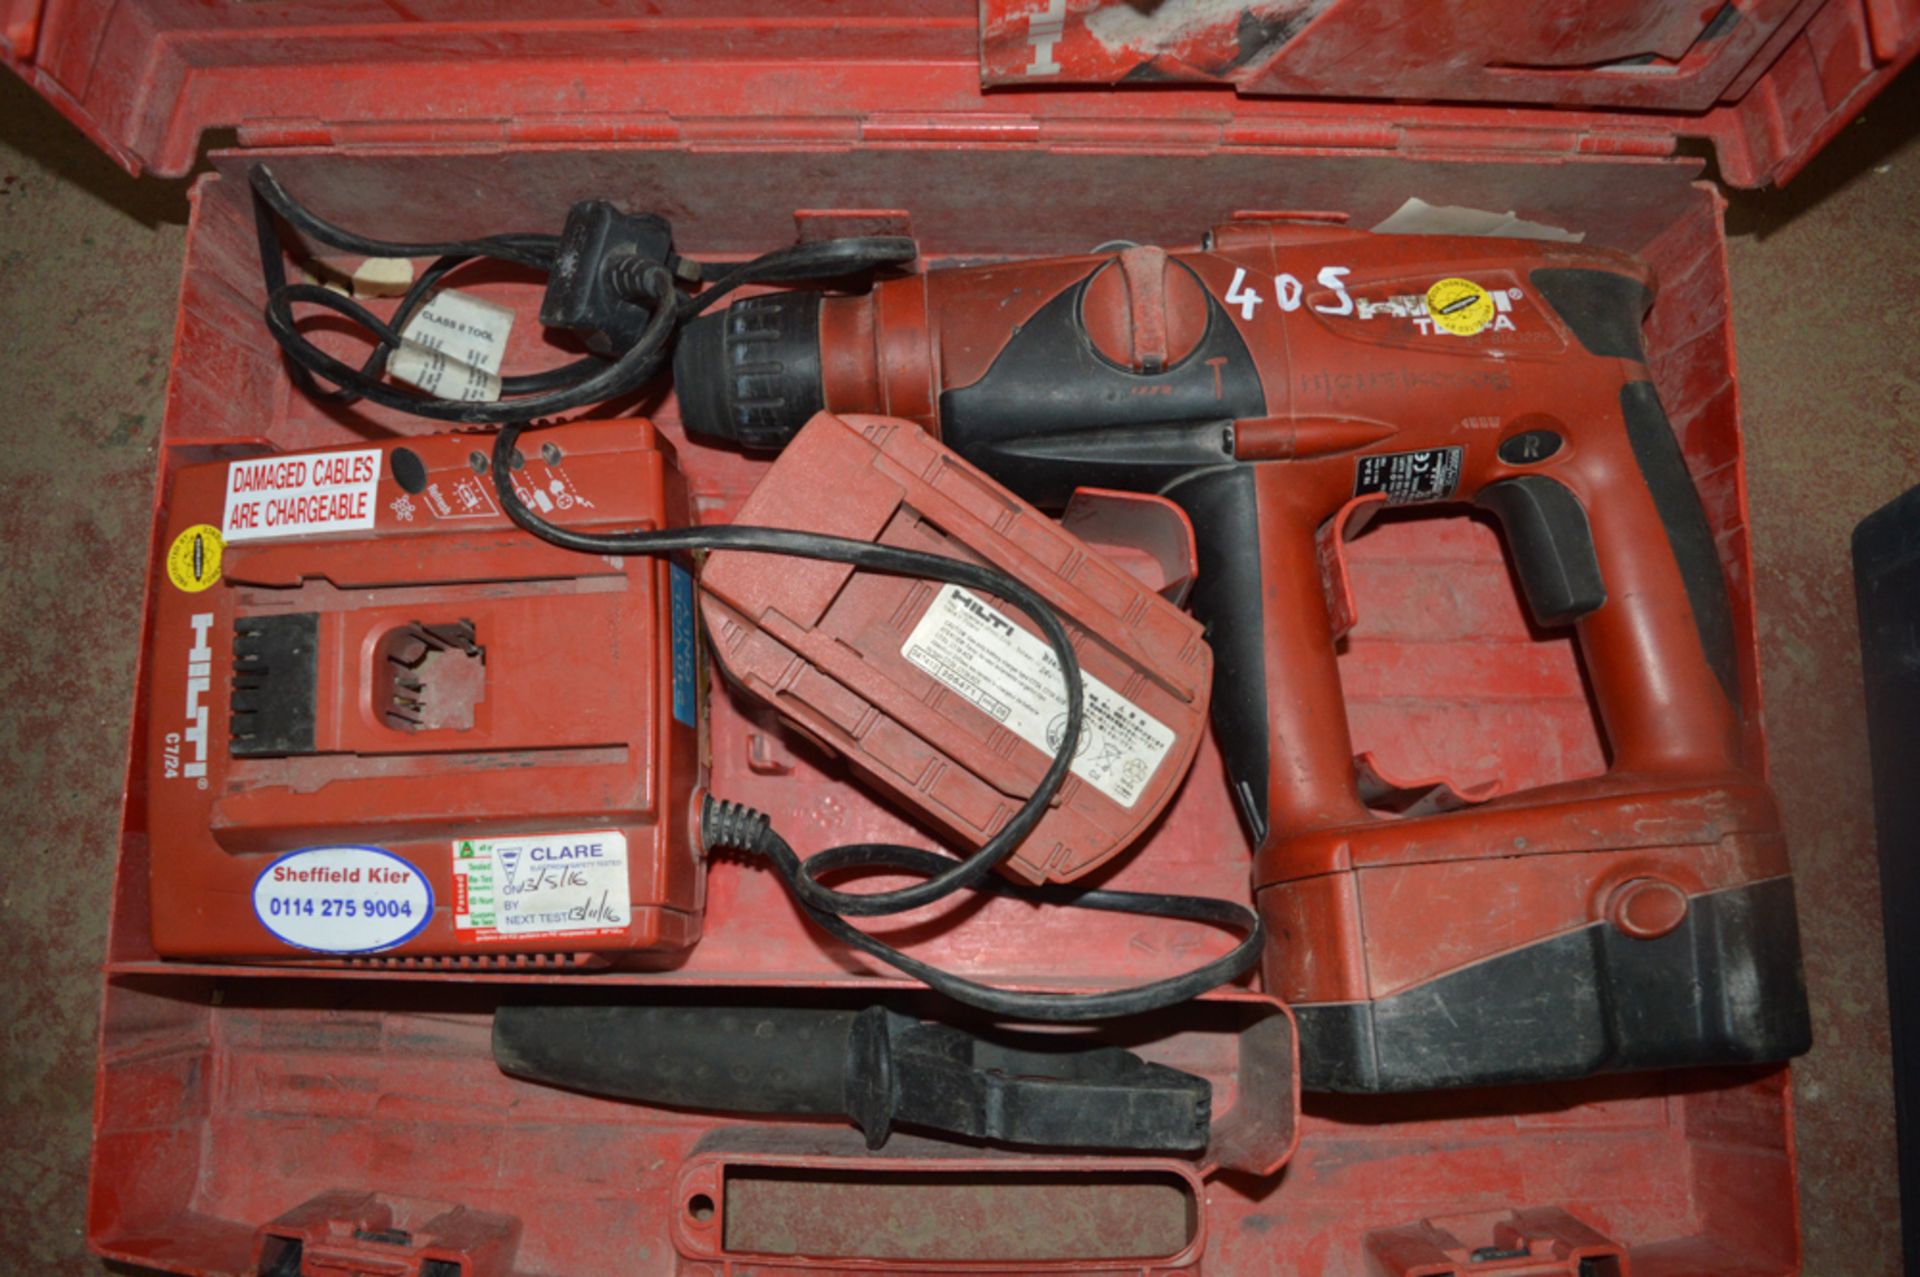 Hilti 24v cordless SDS hammer drill c/w 2 batteries, charger & carry case 0117/K00005